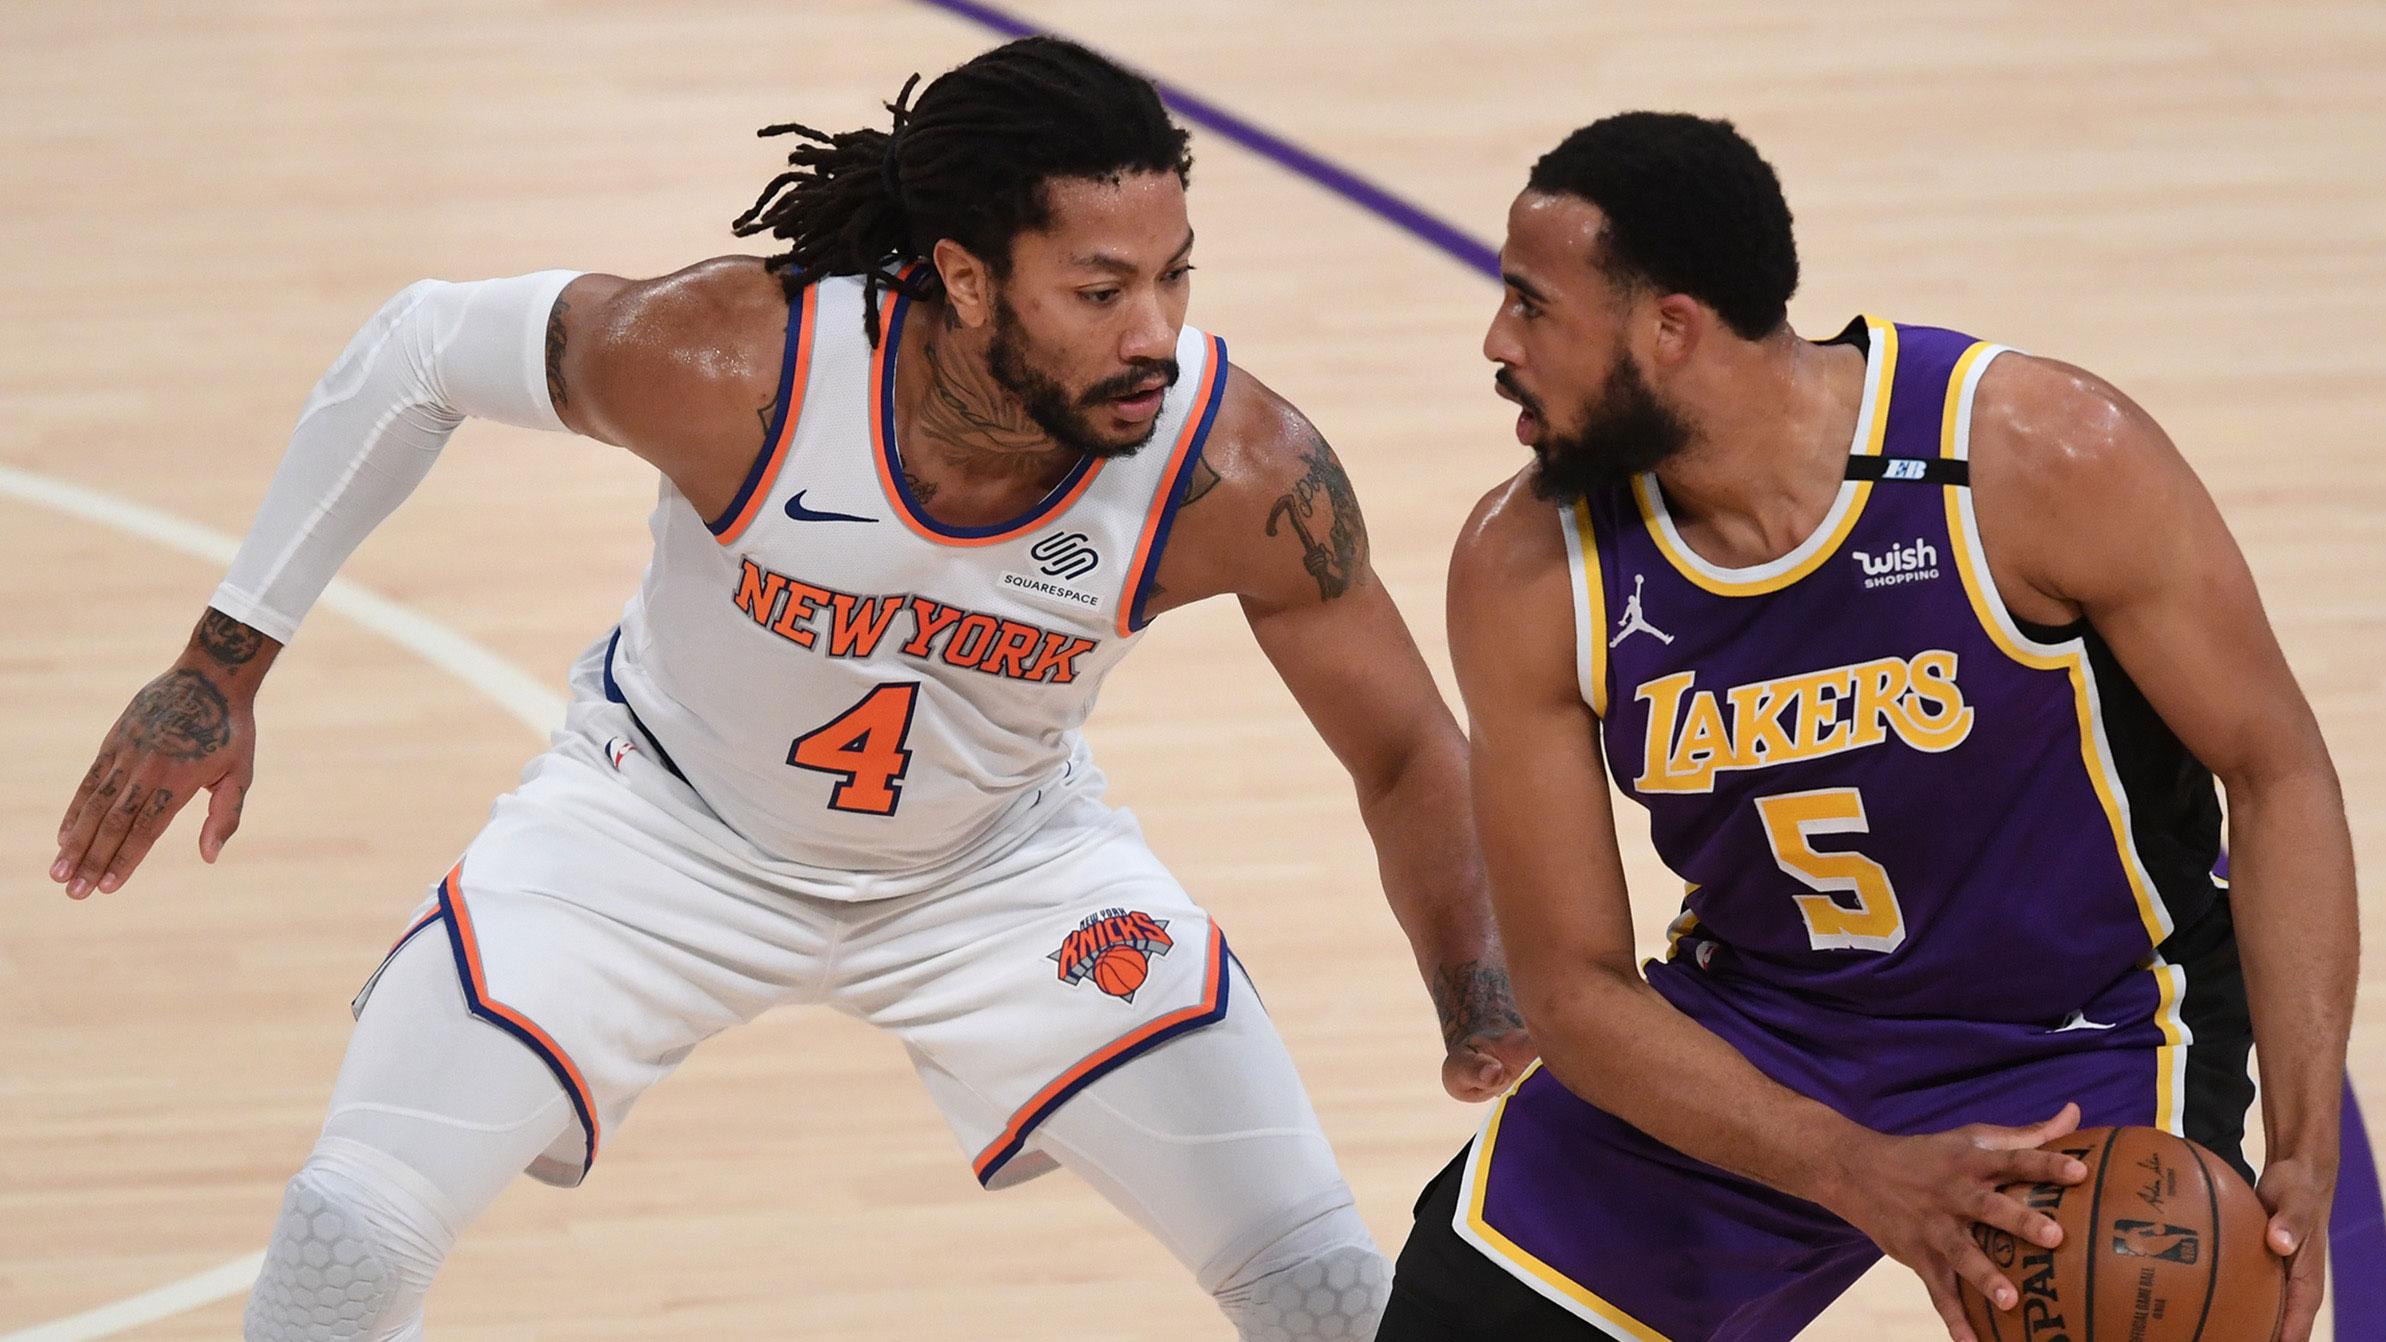 May 11, 2021; Los Angeles, California, USA; New York Knicks guard Derrick Rose (4) defends Los Angeles Lakers guard Talen Horton-Tucker (5) in the first half of the game at Staples Center. / Jayne Kamin-Oncea-USA TODAY Sports